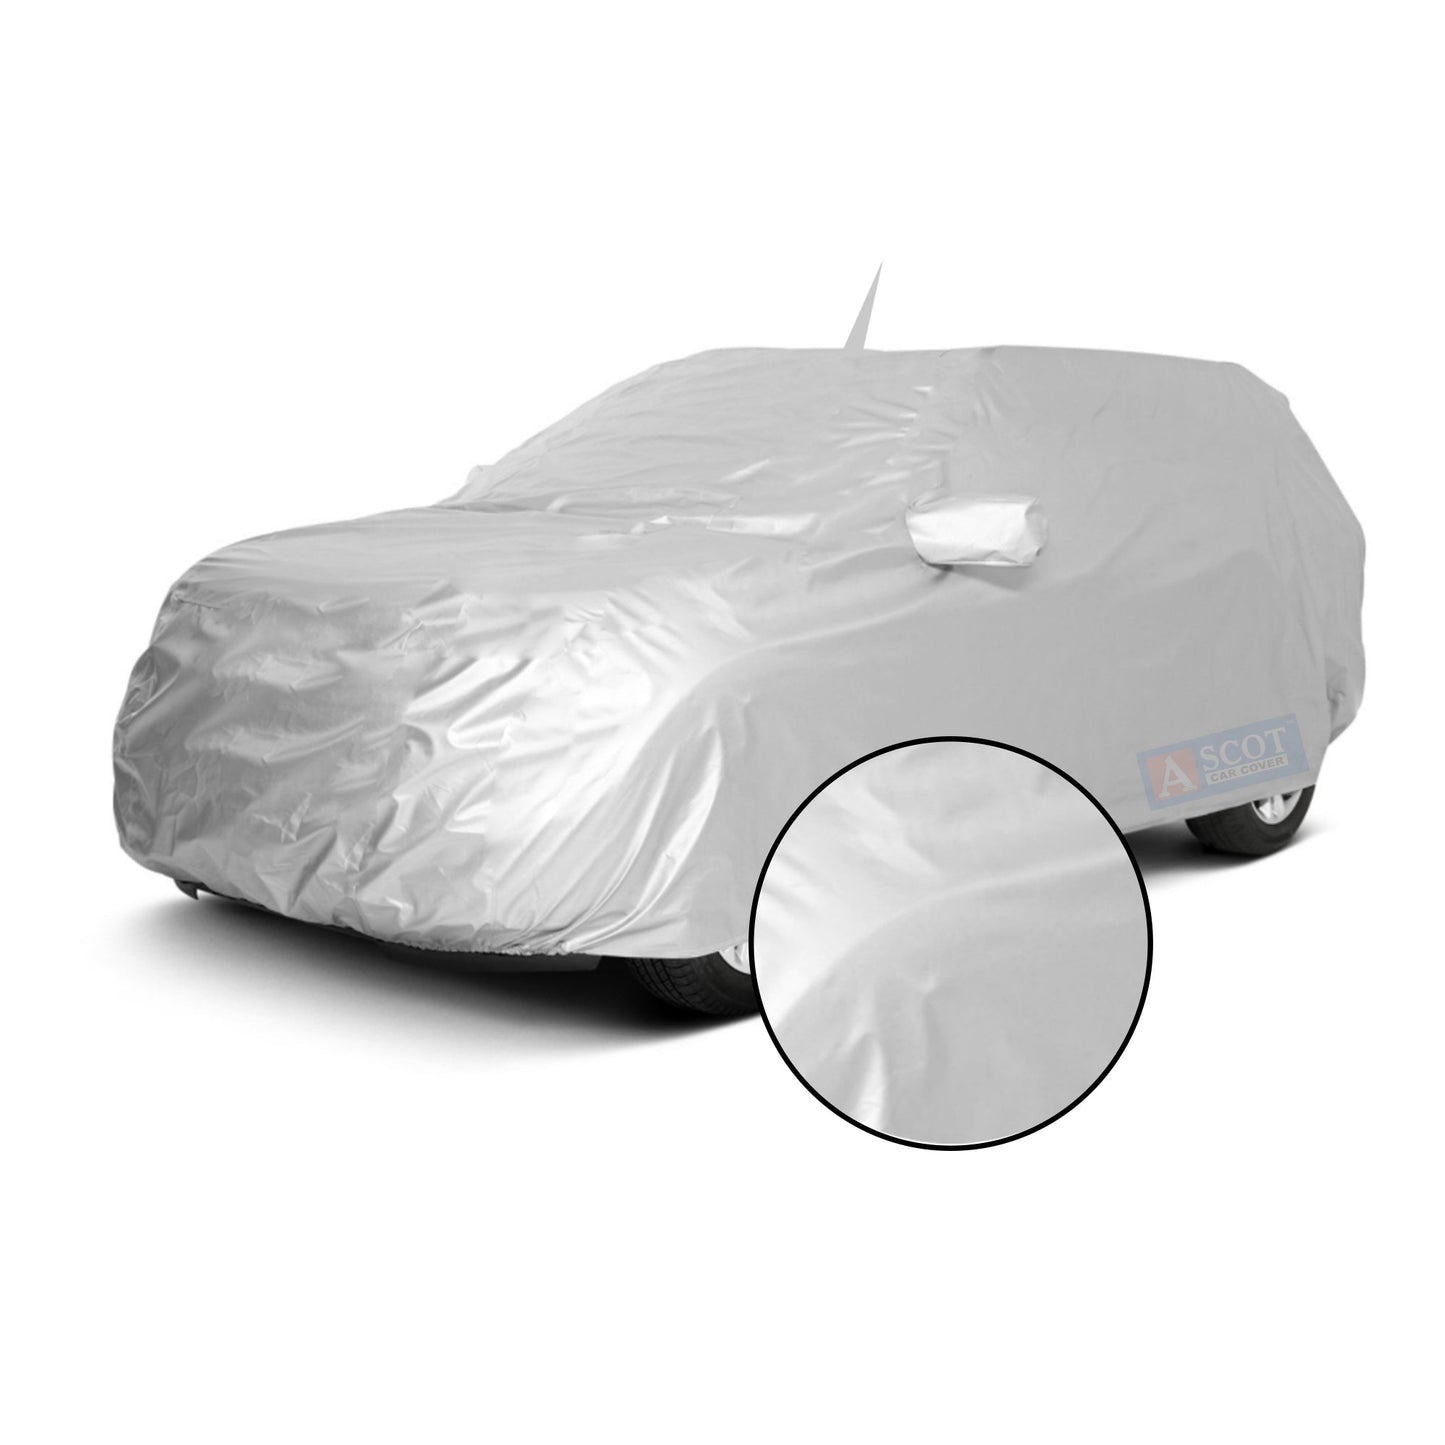 Ascot BMW 5 Series 2003-2010 Model Car Body Cover Dust Proof, Trippel Stitched